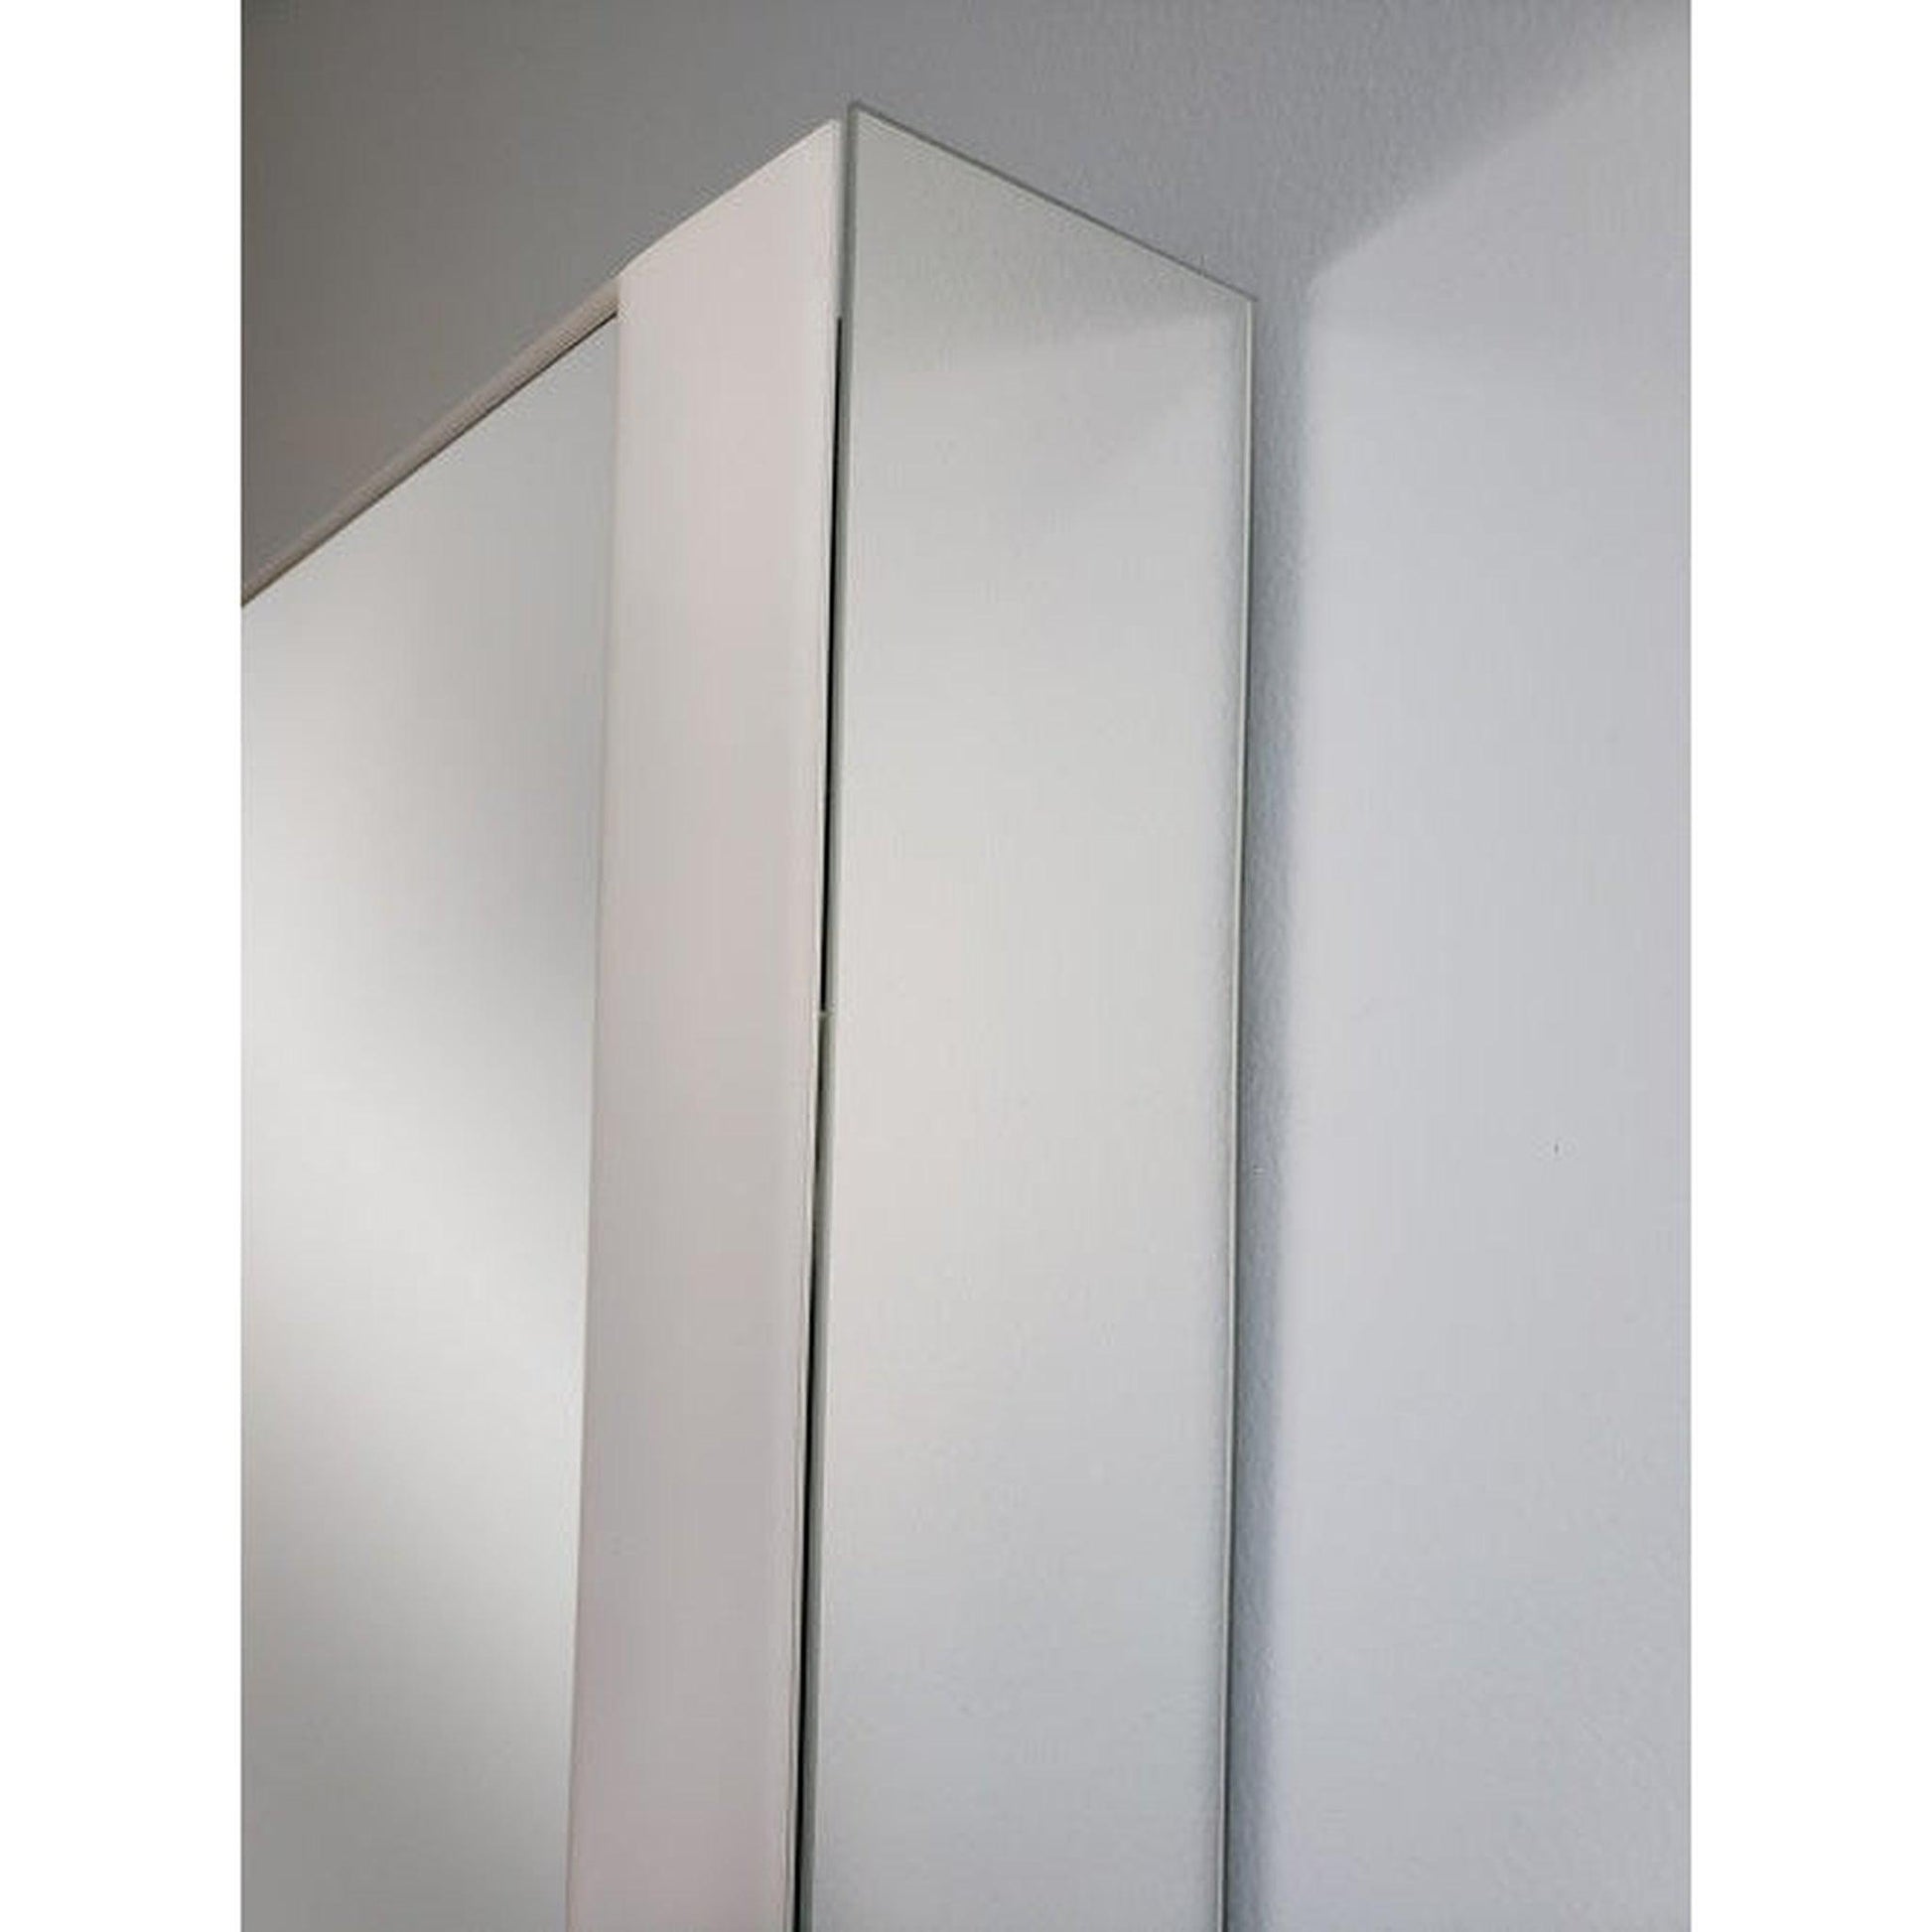 Sidler Quadro 36" x 36" 3000K 2 Offset Right Hinged Mirror Doors Anodized Aluminum Medicine Cabinet With Night Light Function, Built-in GFCI Outlet and USB port